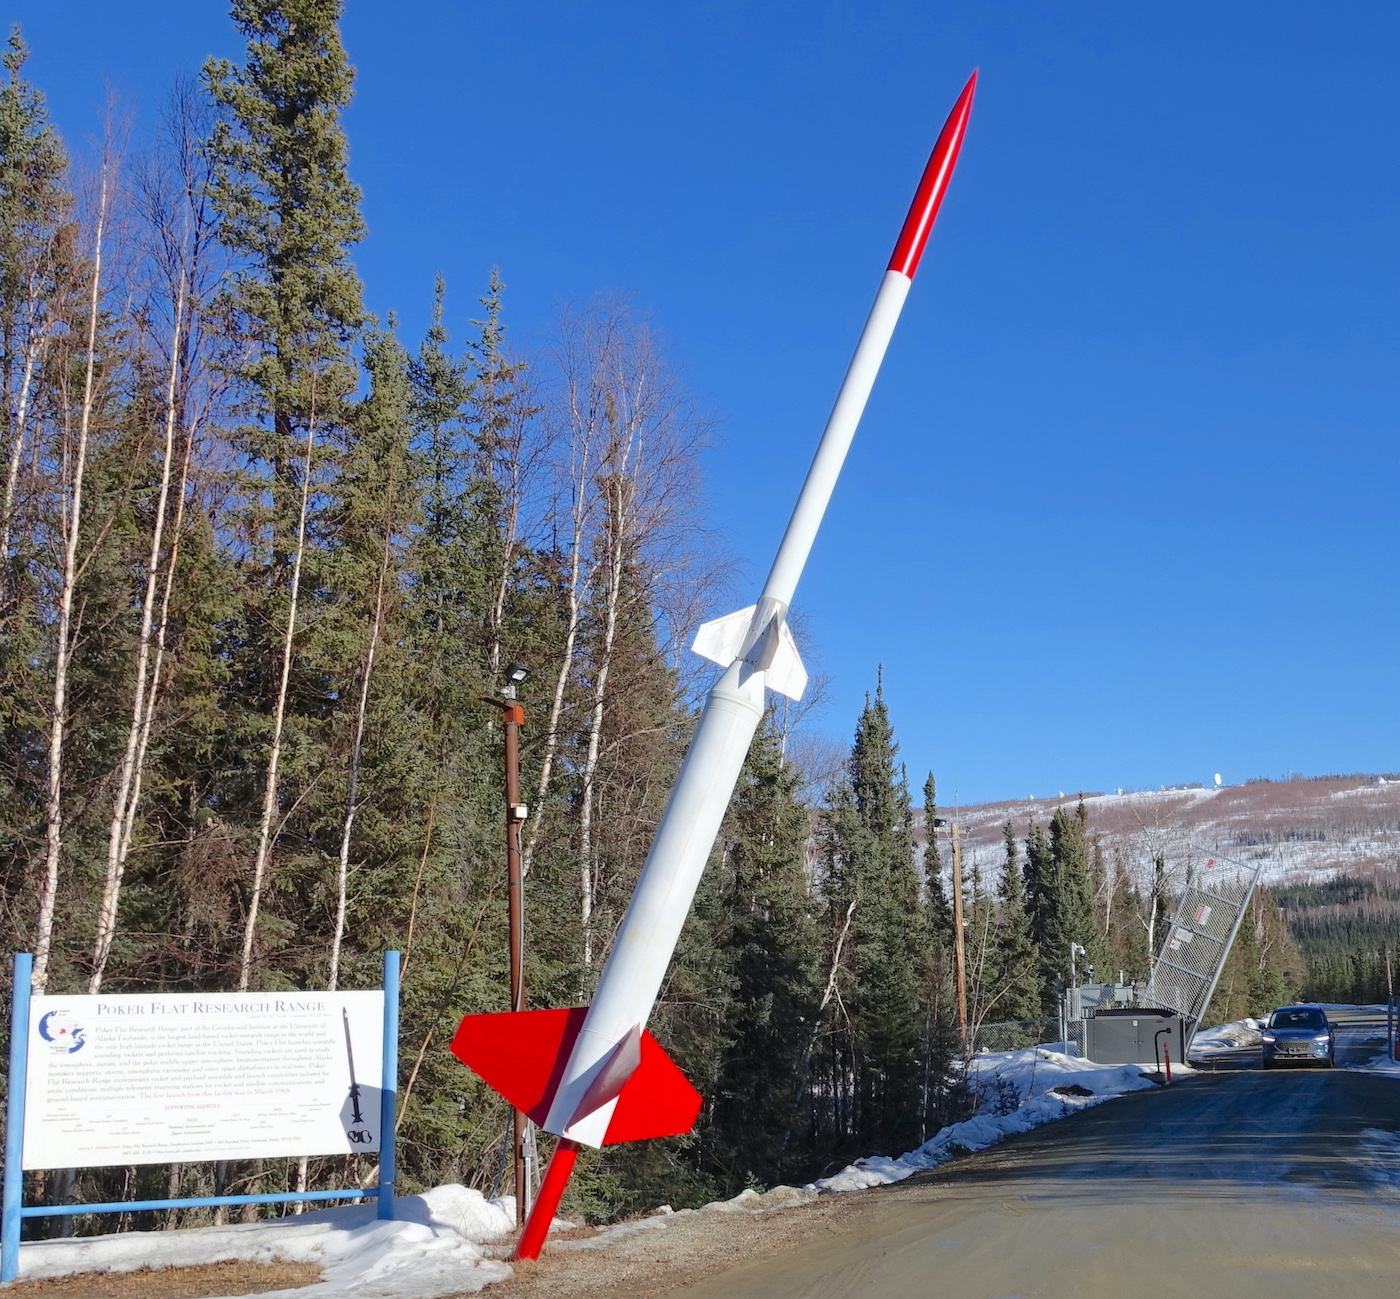 A red and white rocket leans over a road where a car drives through a raised gate. A sign sits next to the rocket. Spruce trees line the road. A hill rises in the background.